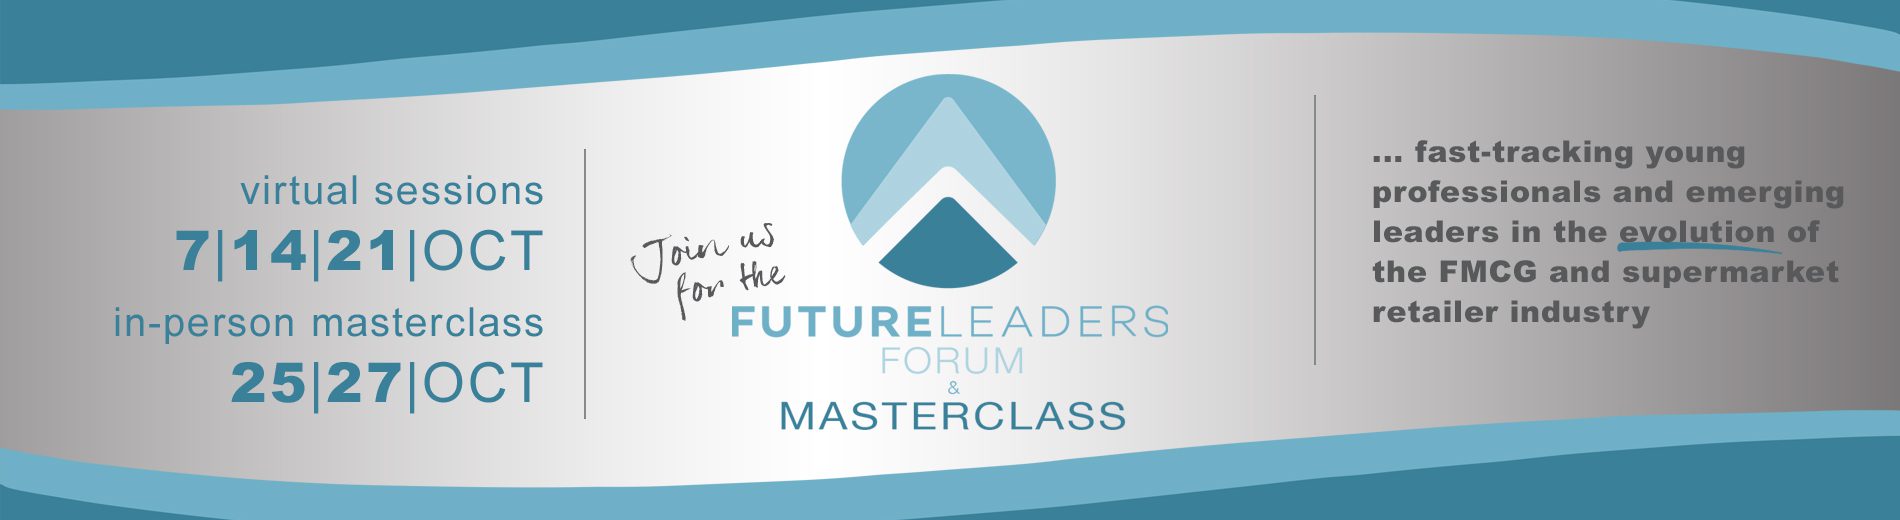 Future Leaders Forum and Masterclass